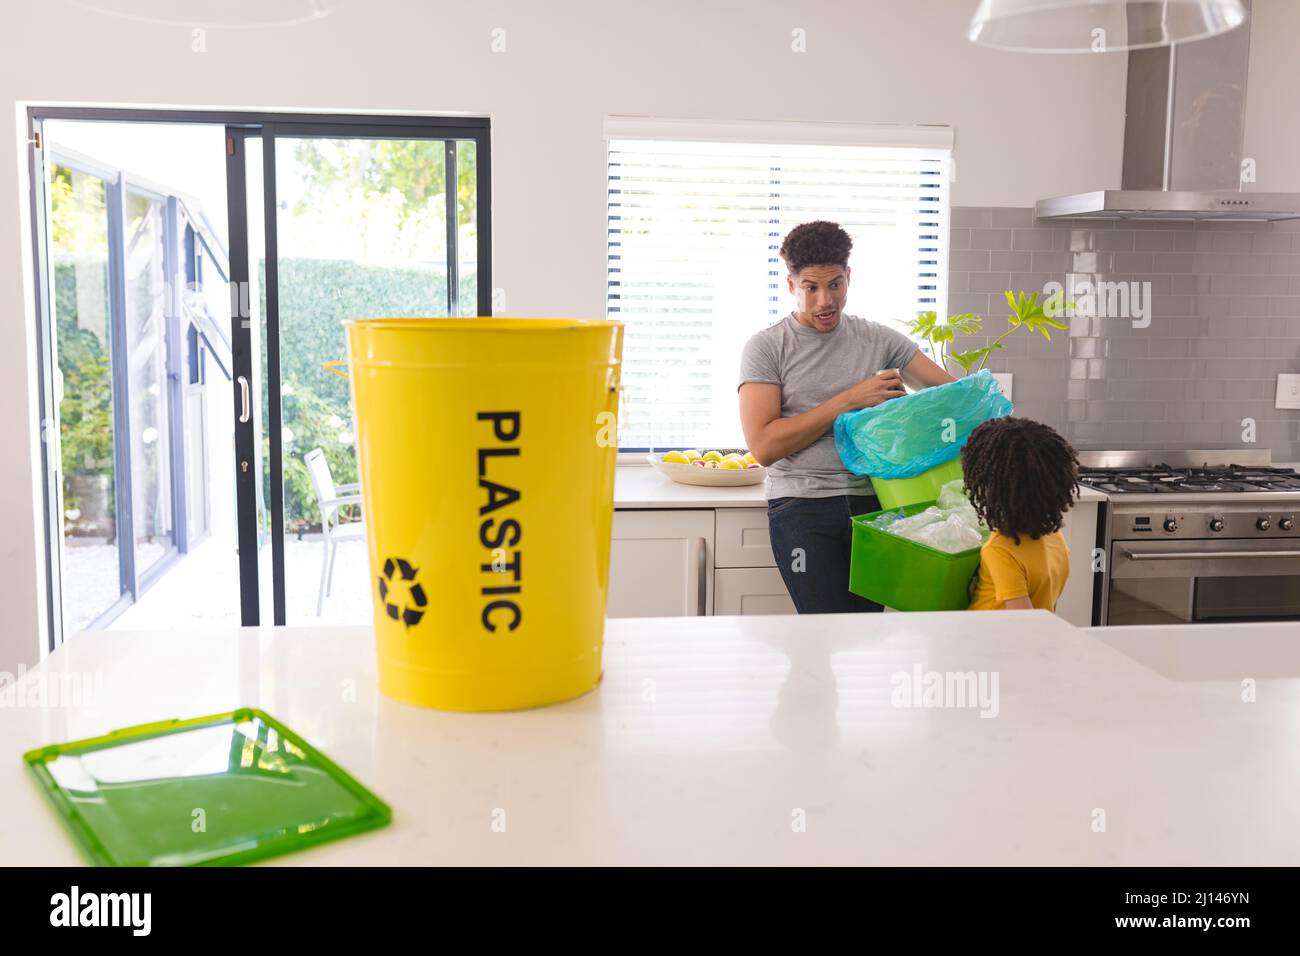 Yellow plastic bucket for recycling against hispanic father teaching son about waste management Stock Photo